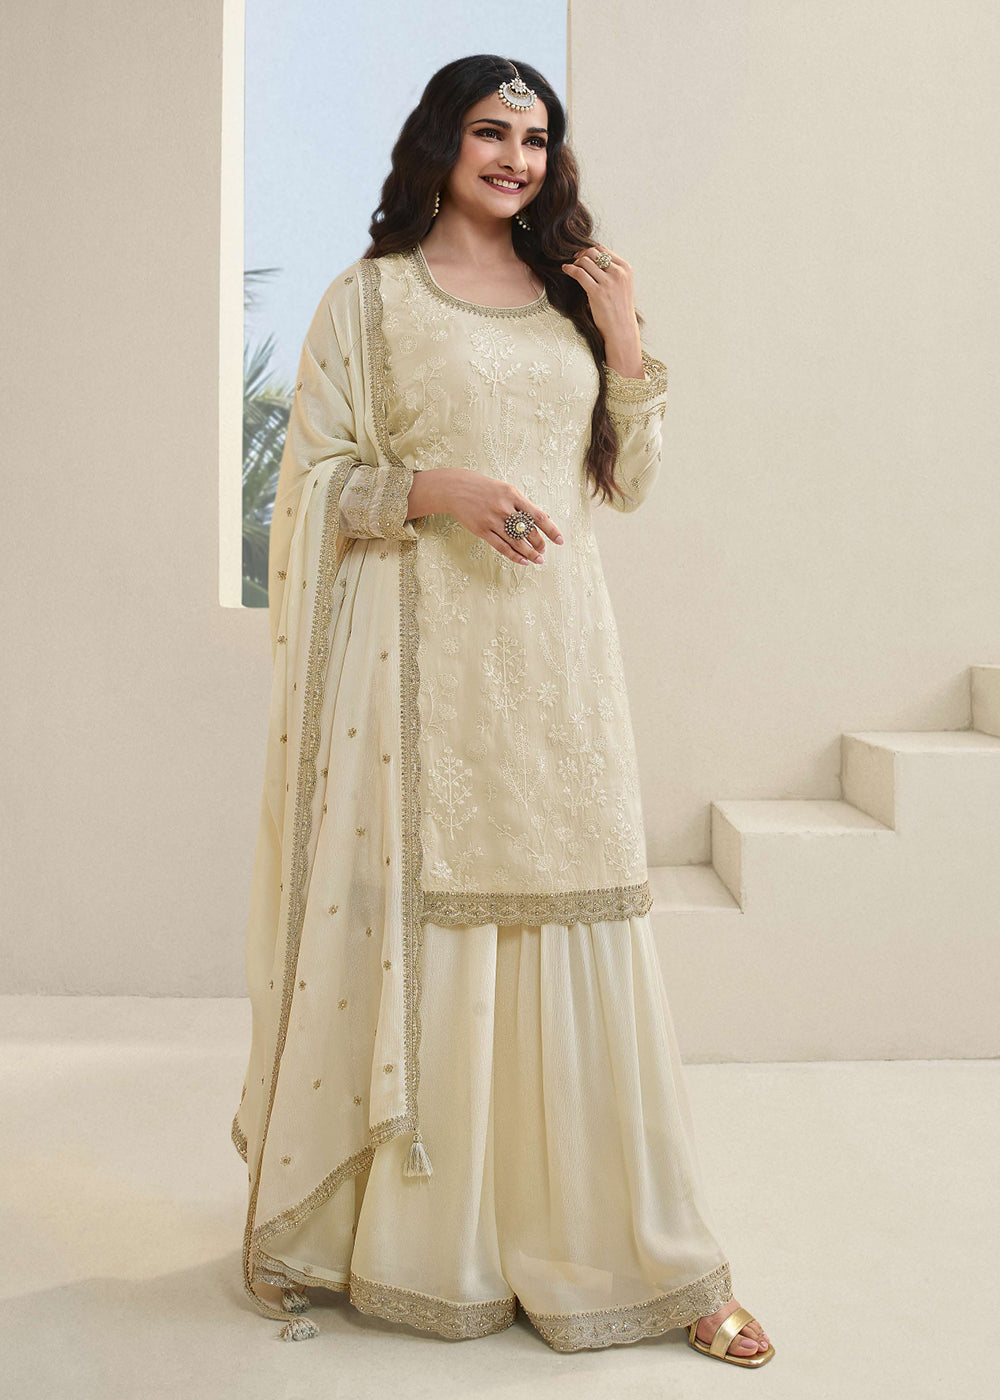 Shop Now Prachi Desai Off White Organza Embroidered Sharara Suit Online at Empress Clothing in USA, UK, Canada, Italy & Worldwide.